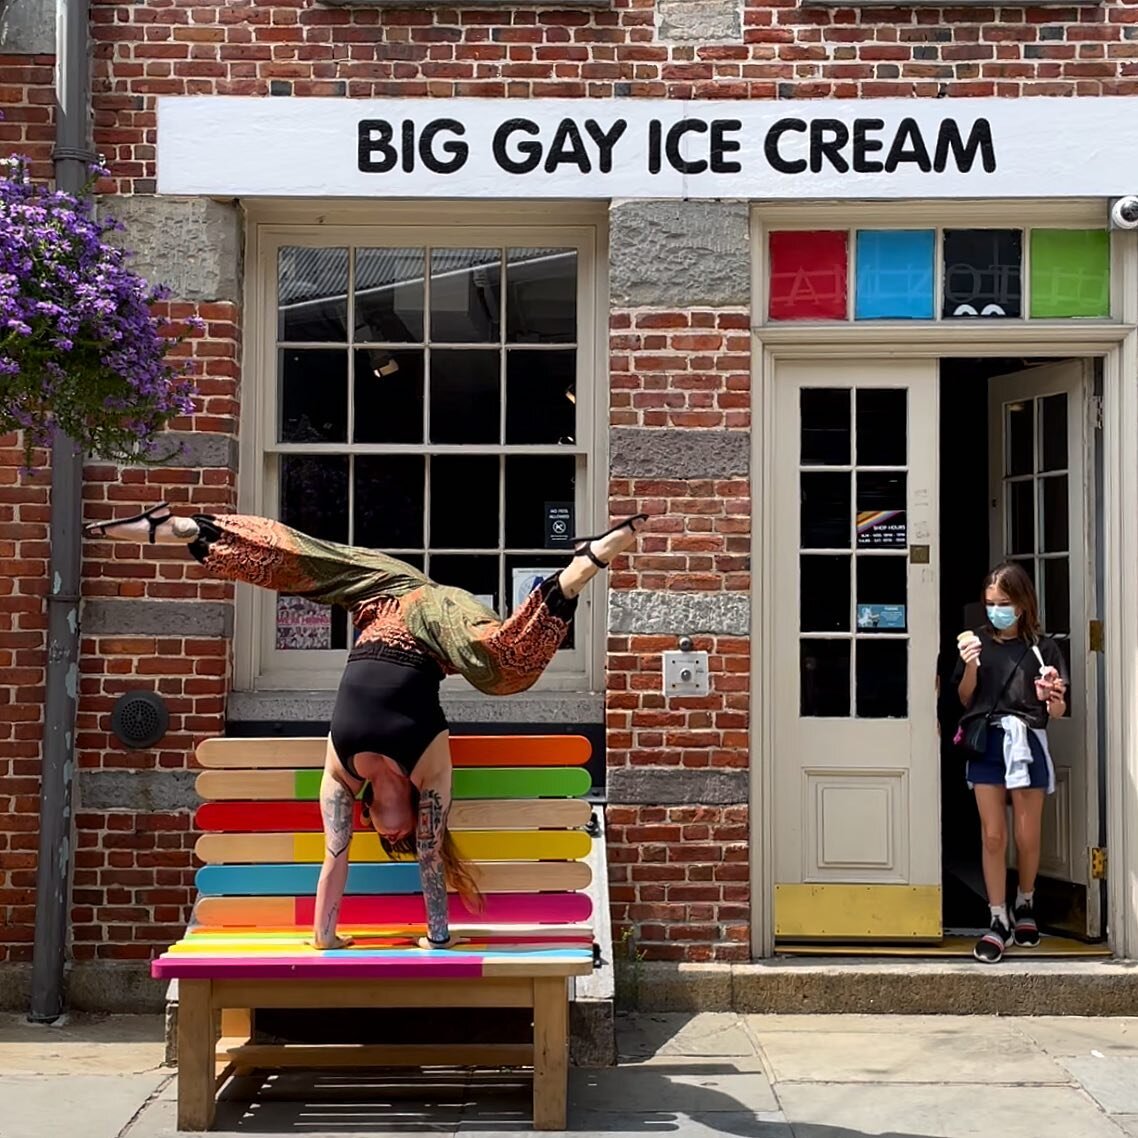 Took my kids for some @biggayicecream today🍦🏳️&zwj;🌈 before heading to the @vangogh.experience🙌 

📸 @leenie1111 🙏❤️

Day 289 of #365handstands 🙃